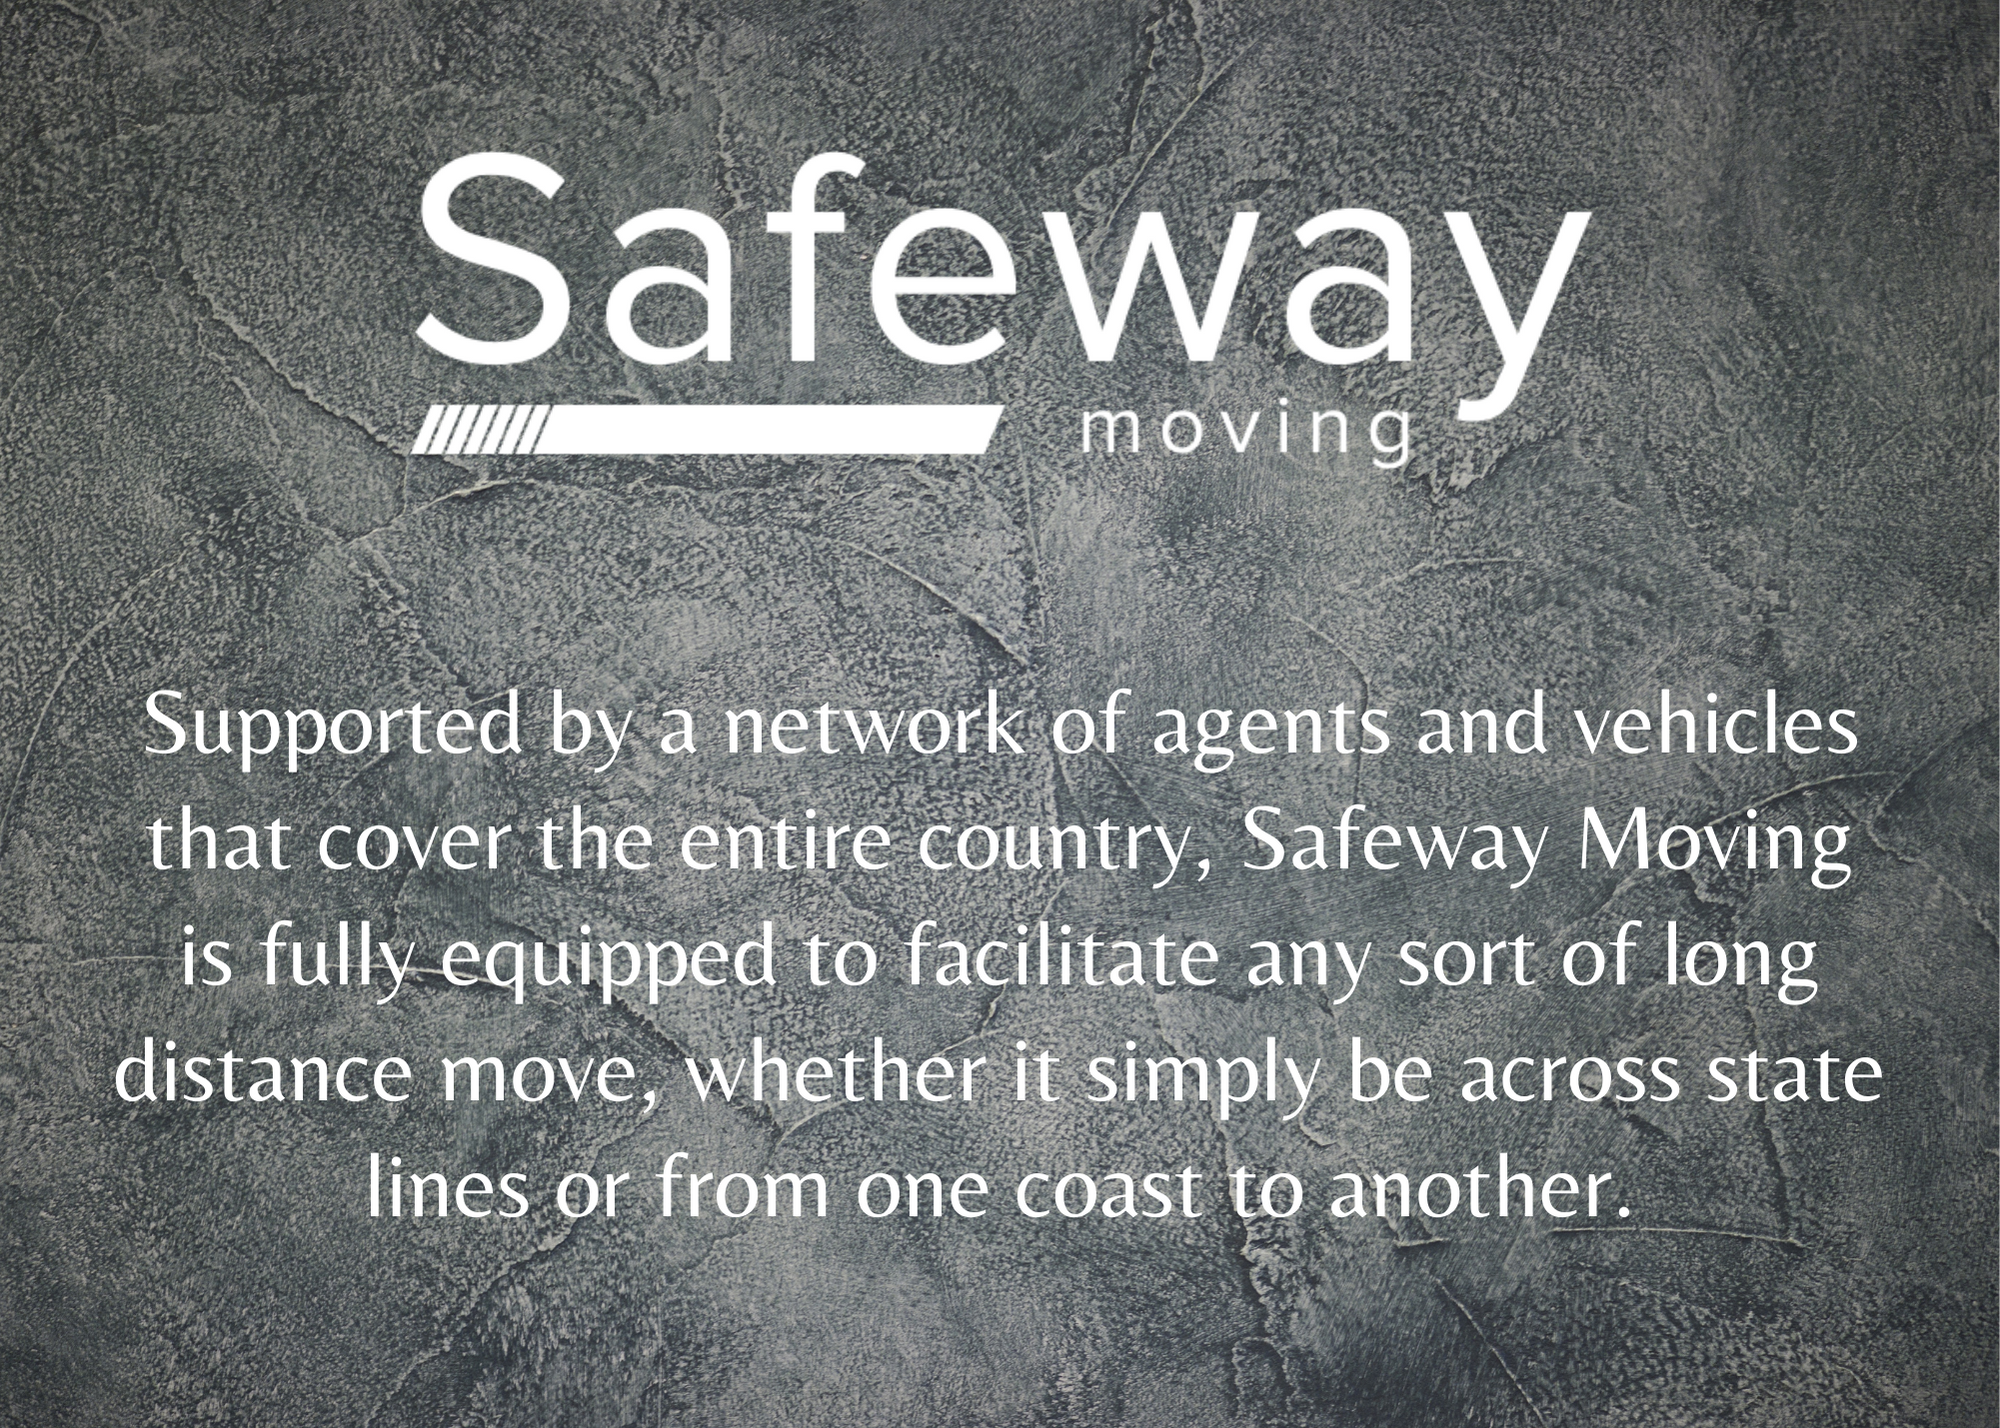 Safeway Moving, Wednesday, May 11, 2022, Press release picture